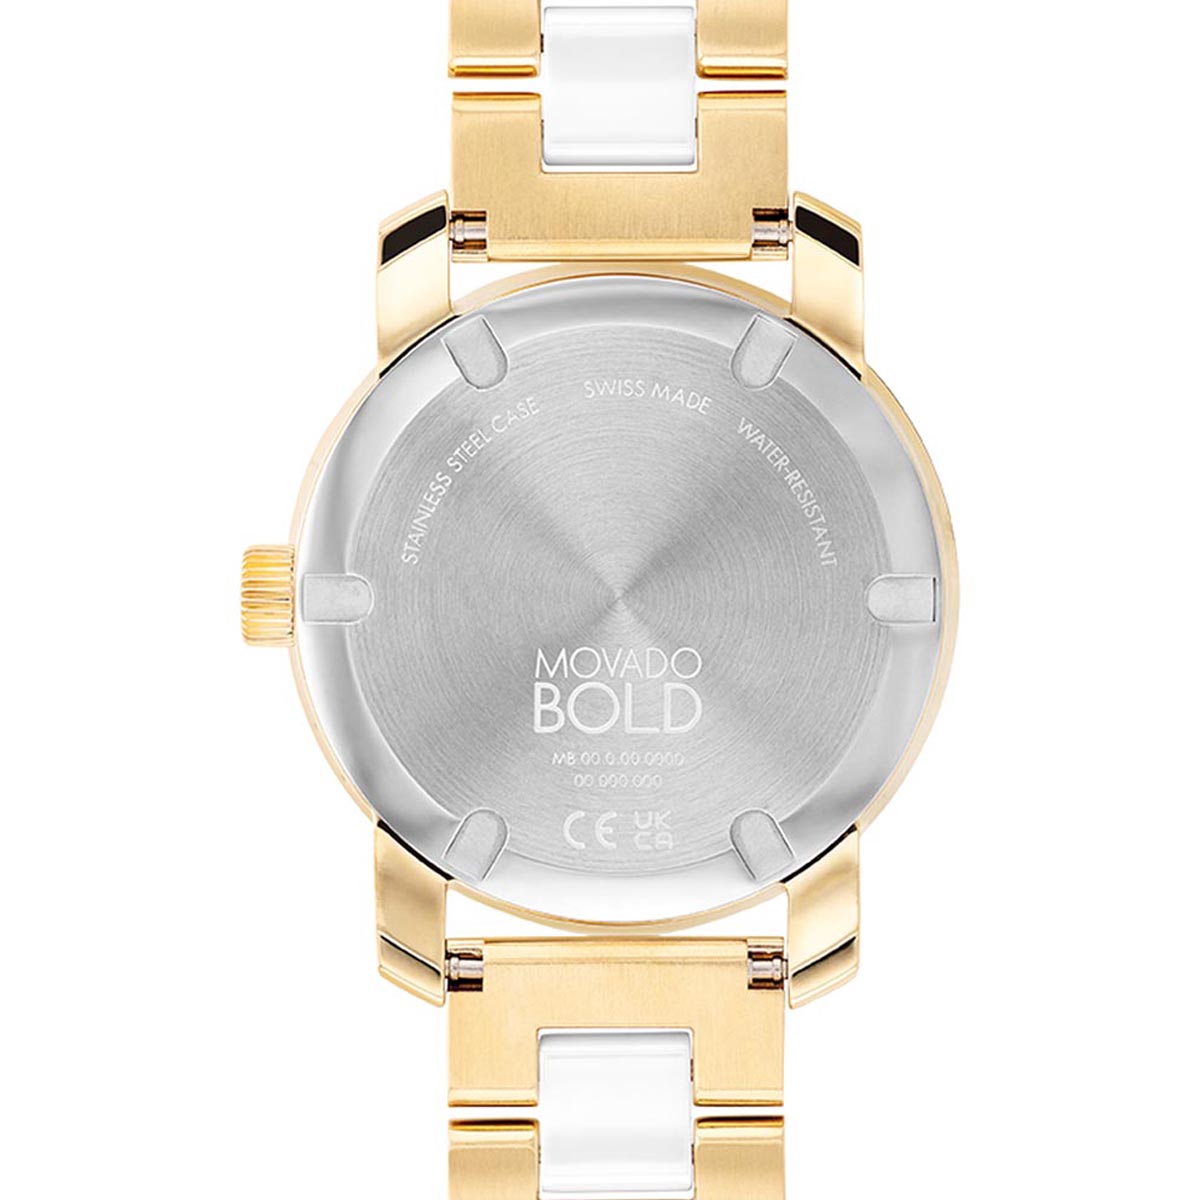 Movado Bold Womens Watch with White Dial and Gold Tone Ion Plated and Ceramic Bracelet (Swiss quartz movement)